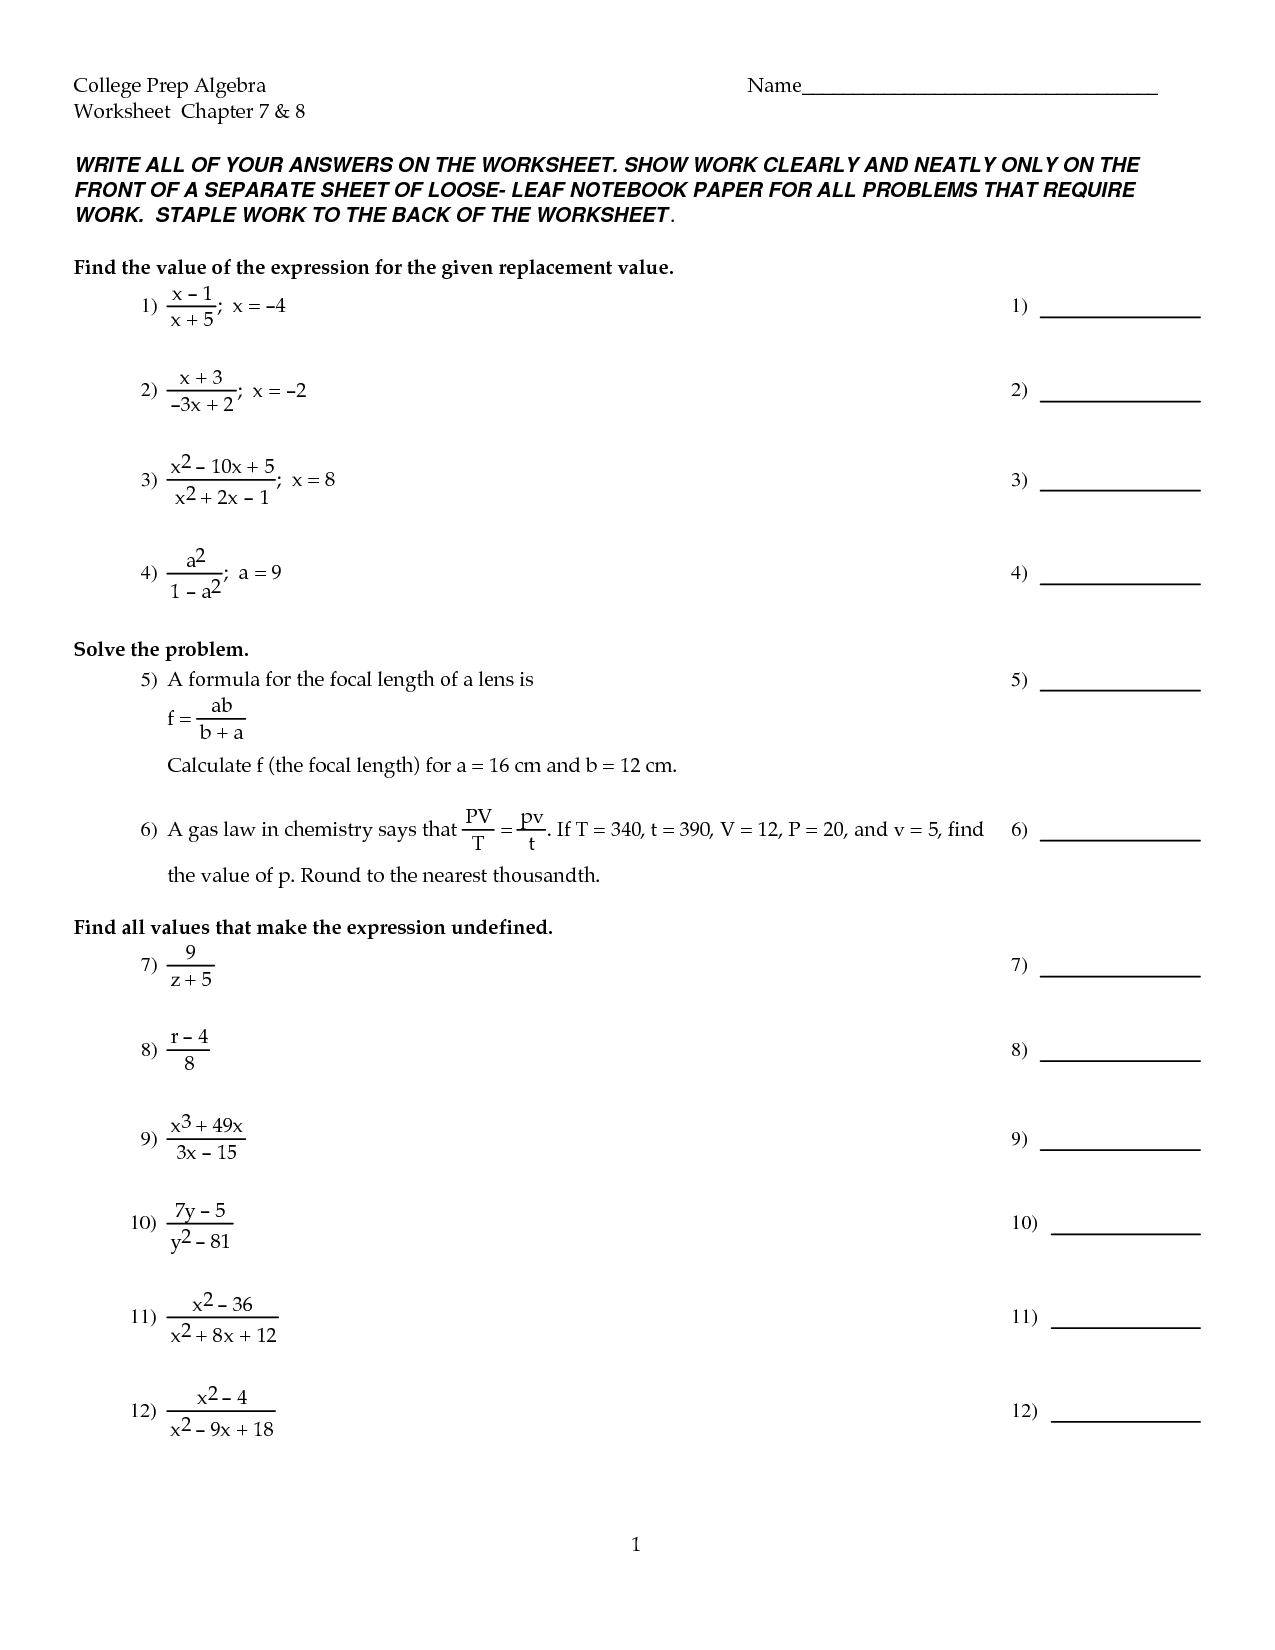 College Algebra Worksheets with Answers Image